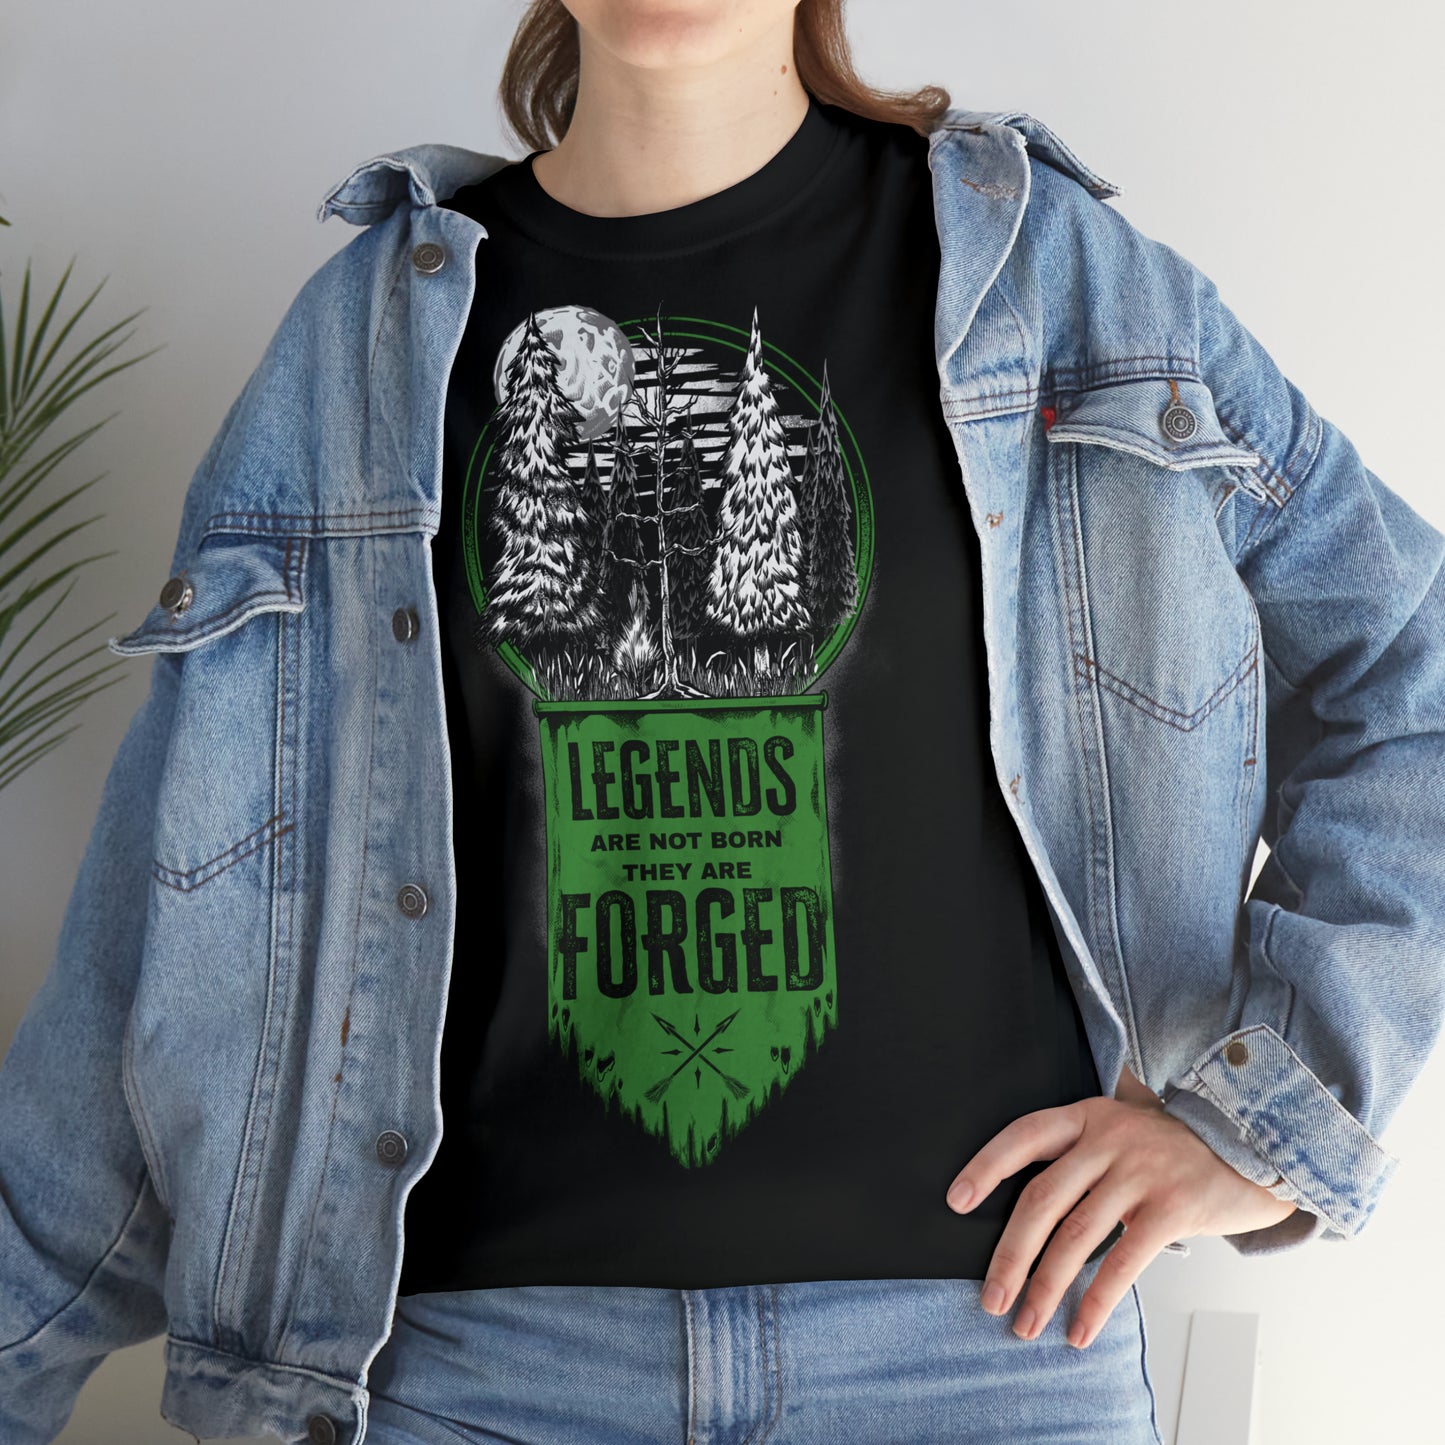 Legends Tee: "A Forest Of Vanity And Valour" Edition - Black